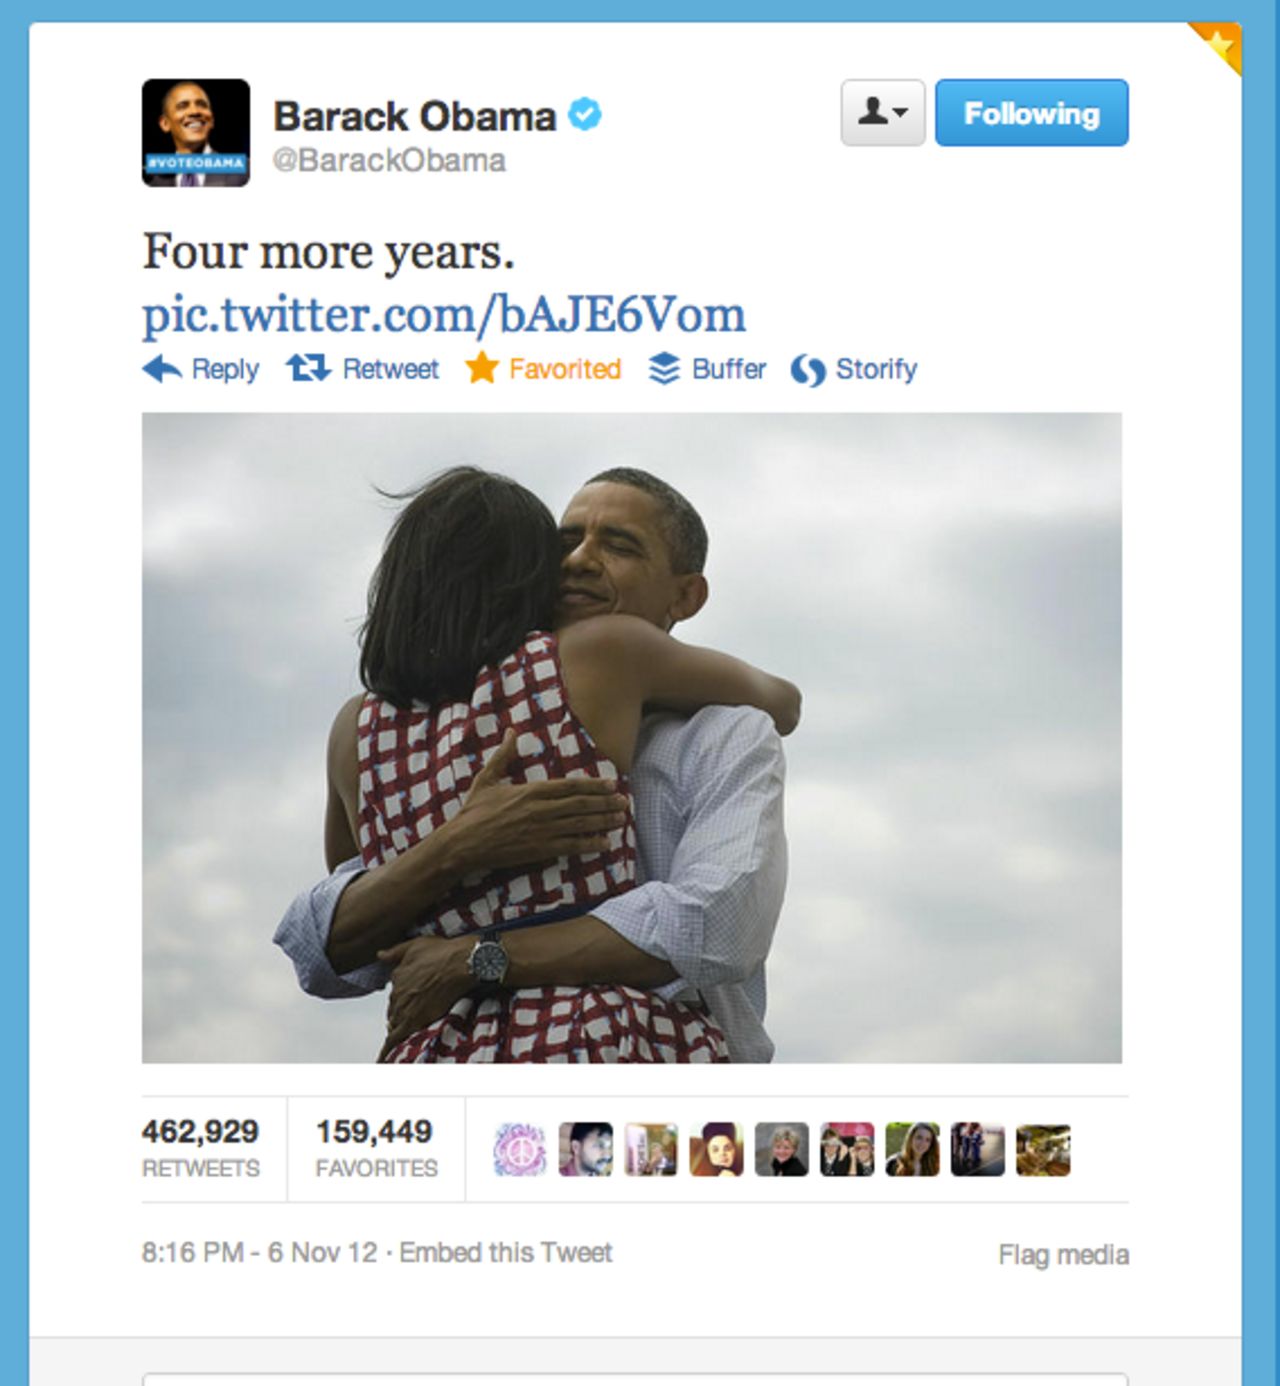 This tweet by President Obama's account, shortly after his re-election on November 5, 2012, became the most retweeted post of all time until it was topped by Ellen DeGeneres's group selfie at the Oscars.